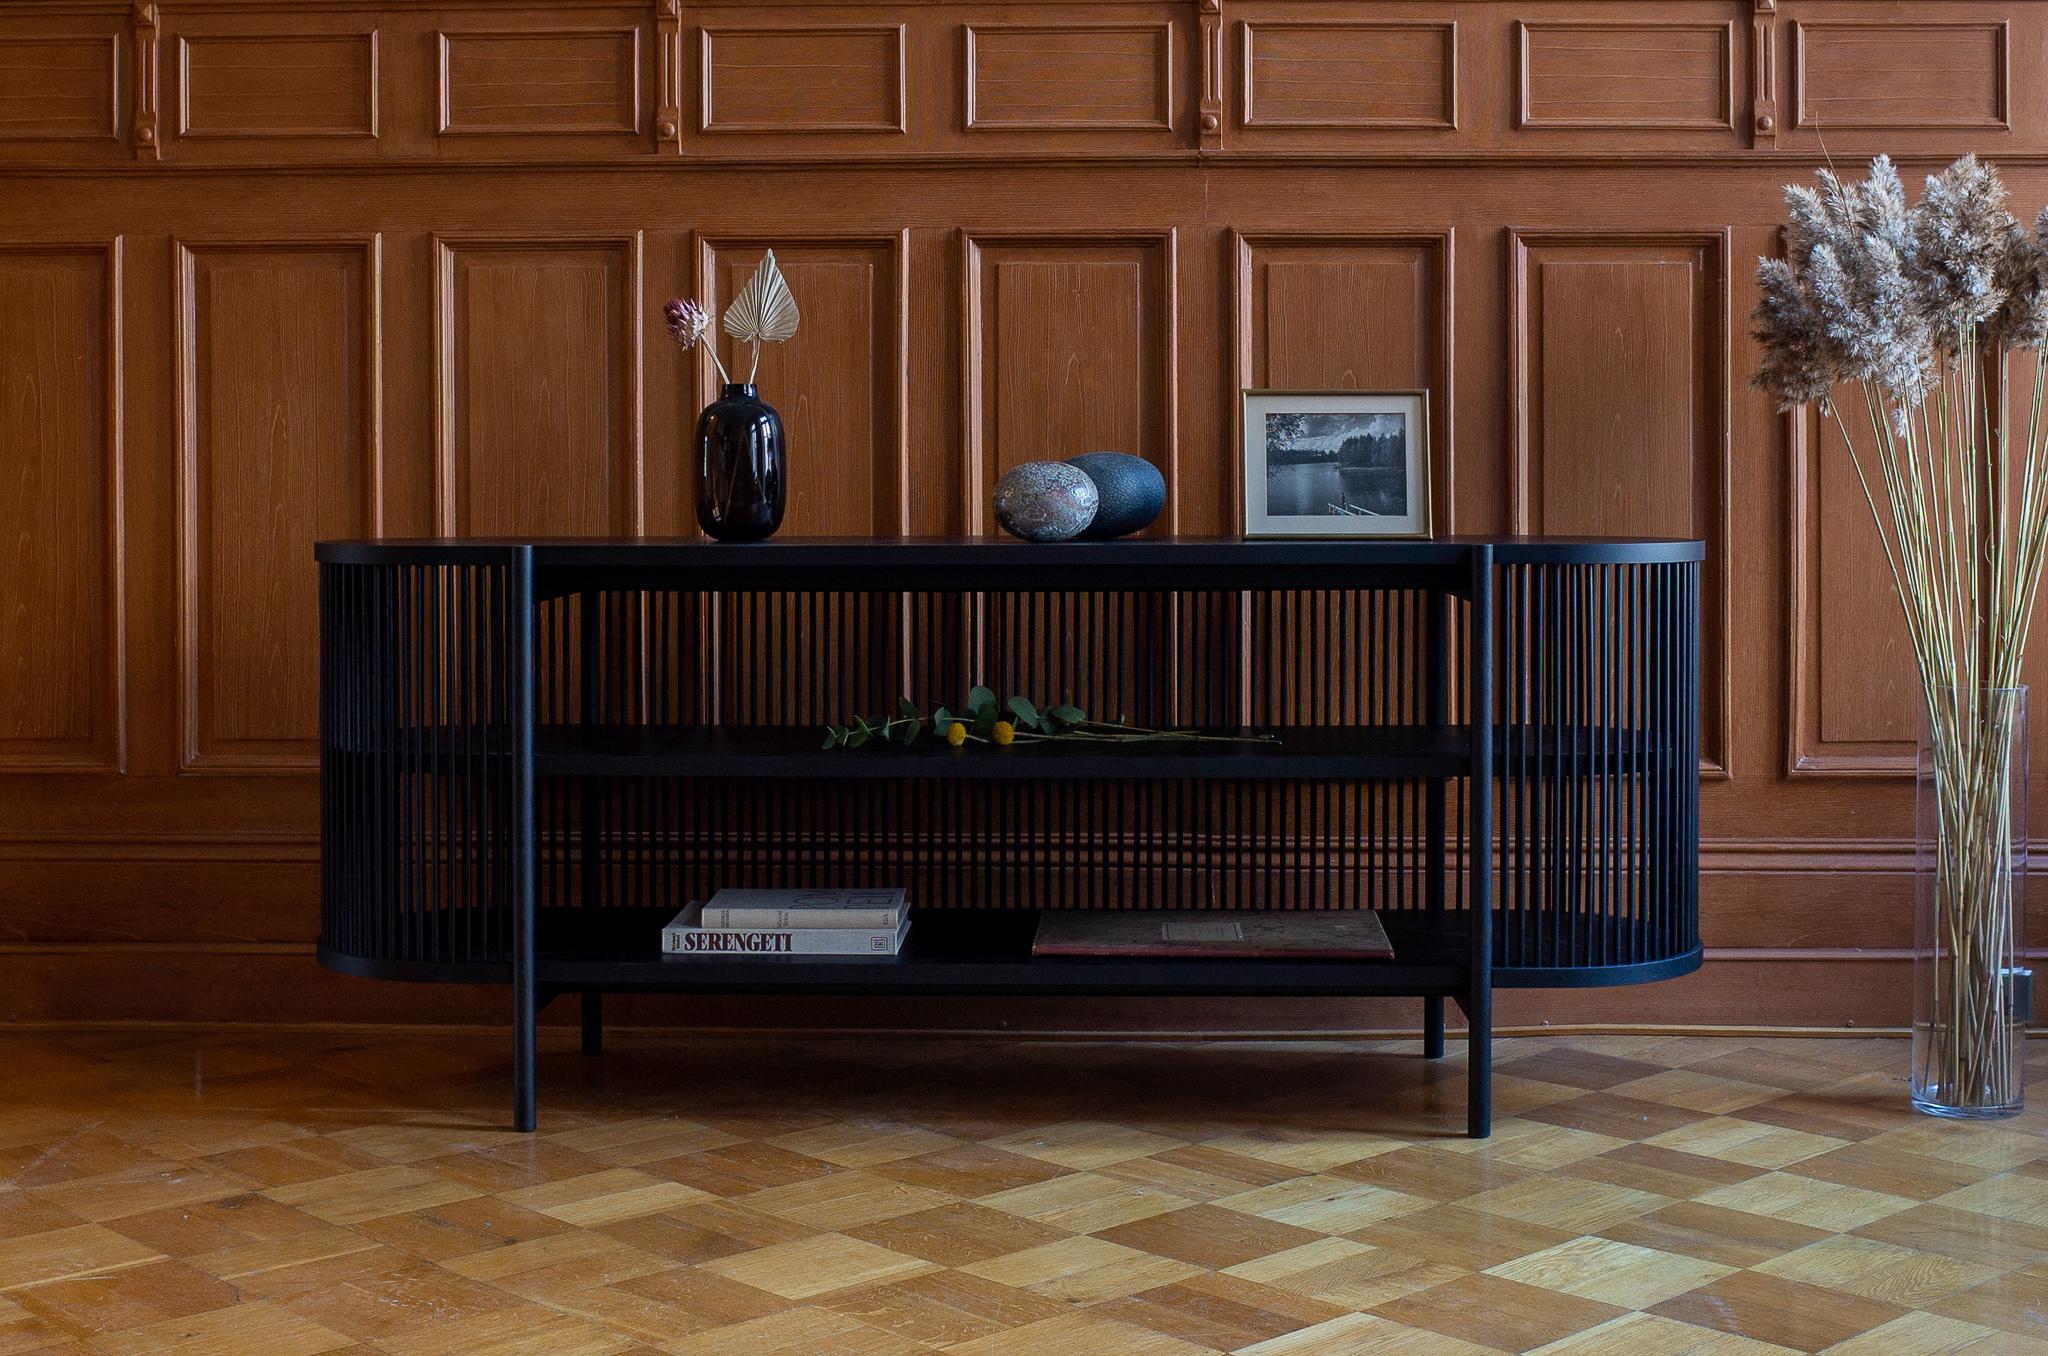 The Bastone case piece collection, which consists of a cabinet and a sideboard, is designed by the master cabinet maker and designer Antrei Hartikainen for Poiat studio. Somewhere on the boundary of art and design, the collection showcases the